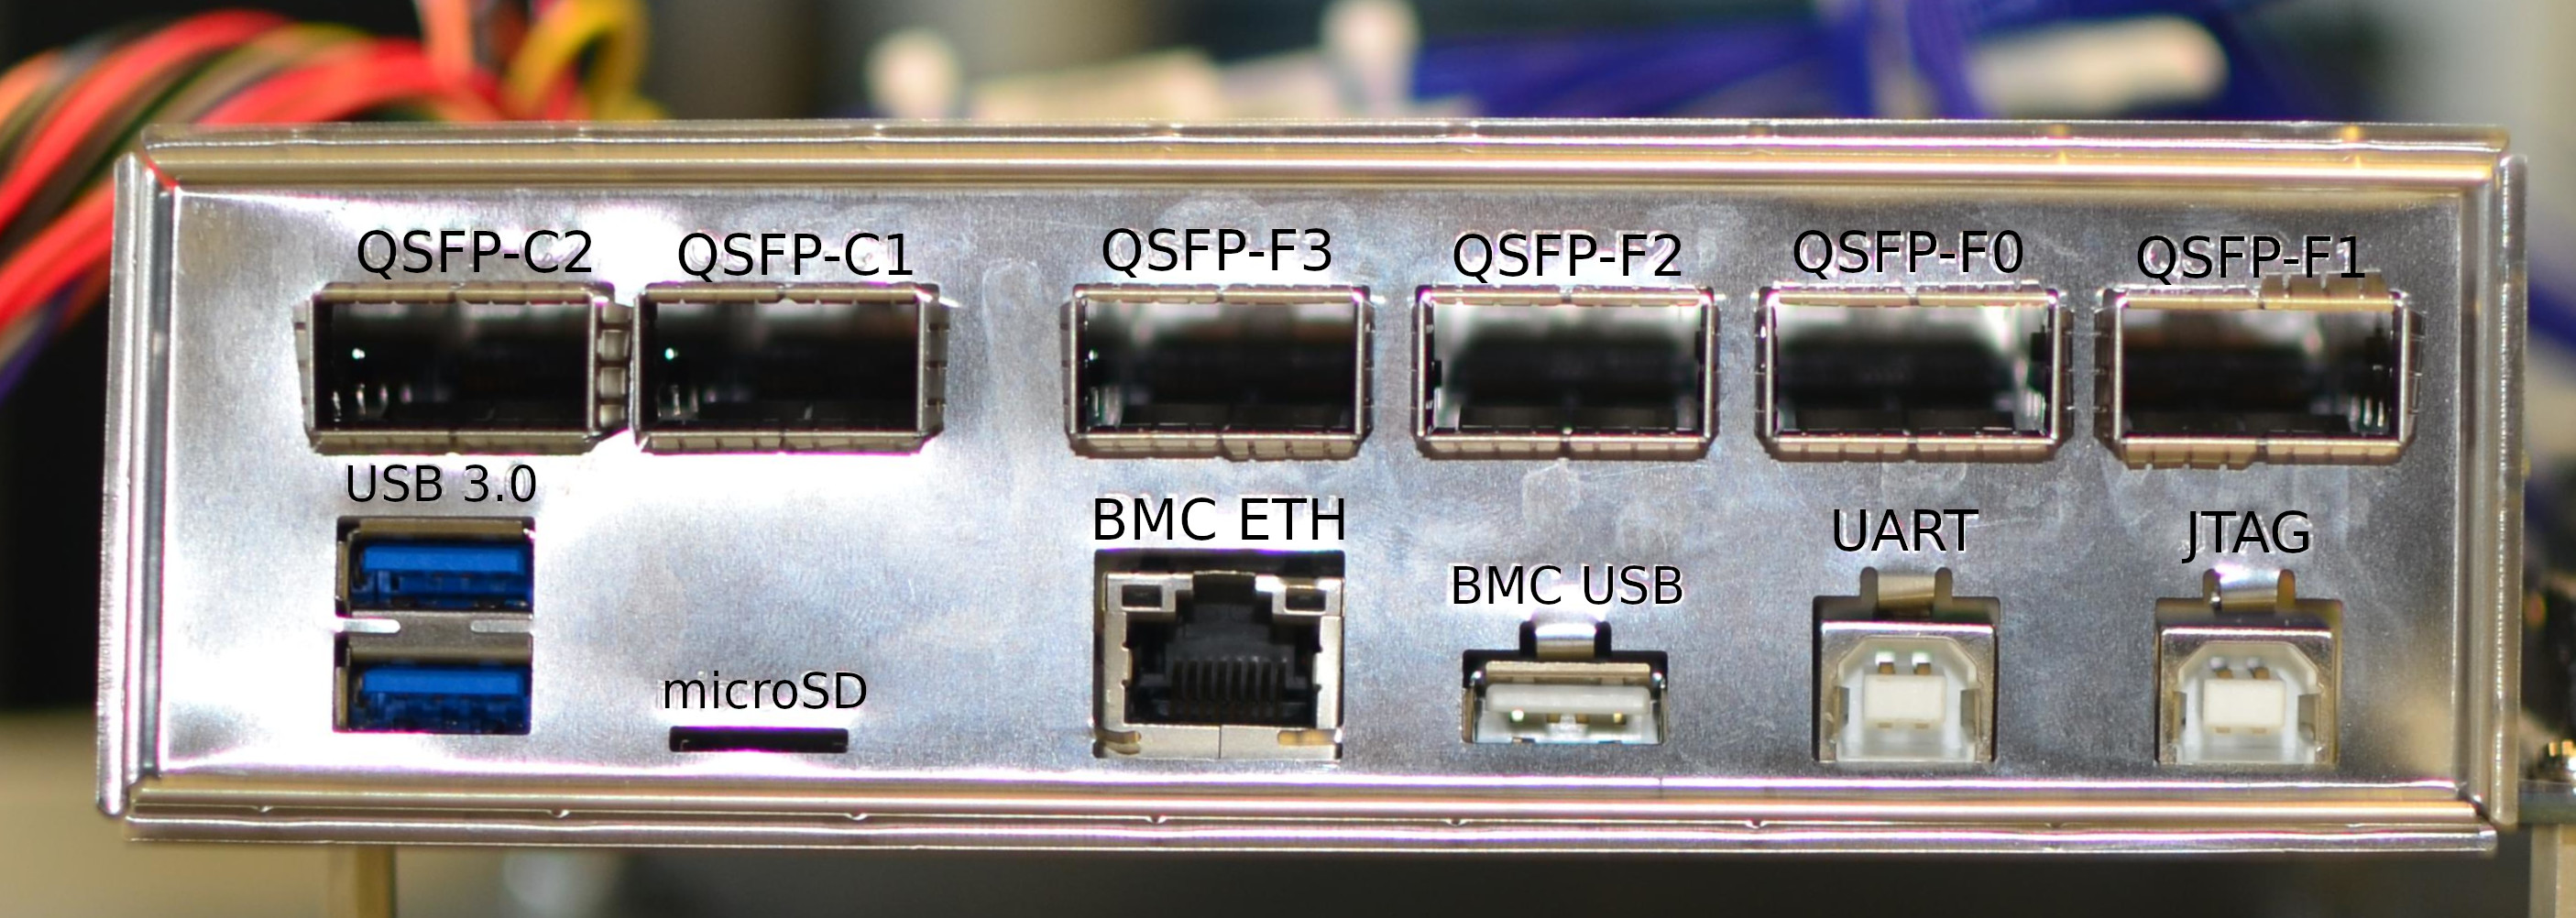 Labeled IO ports on the Enzian's rear panel